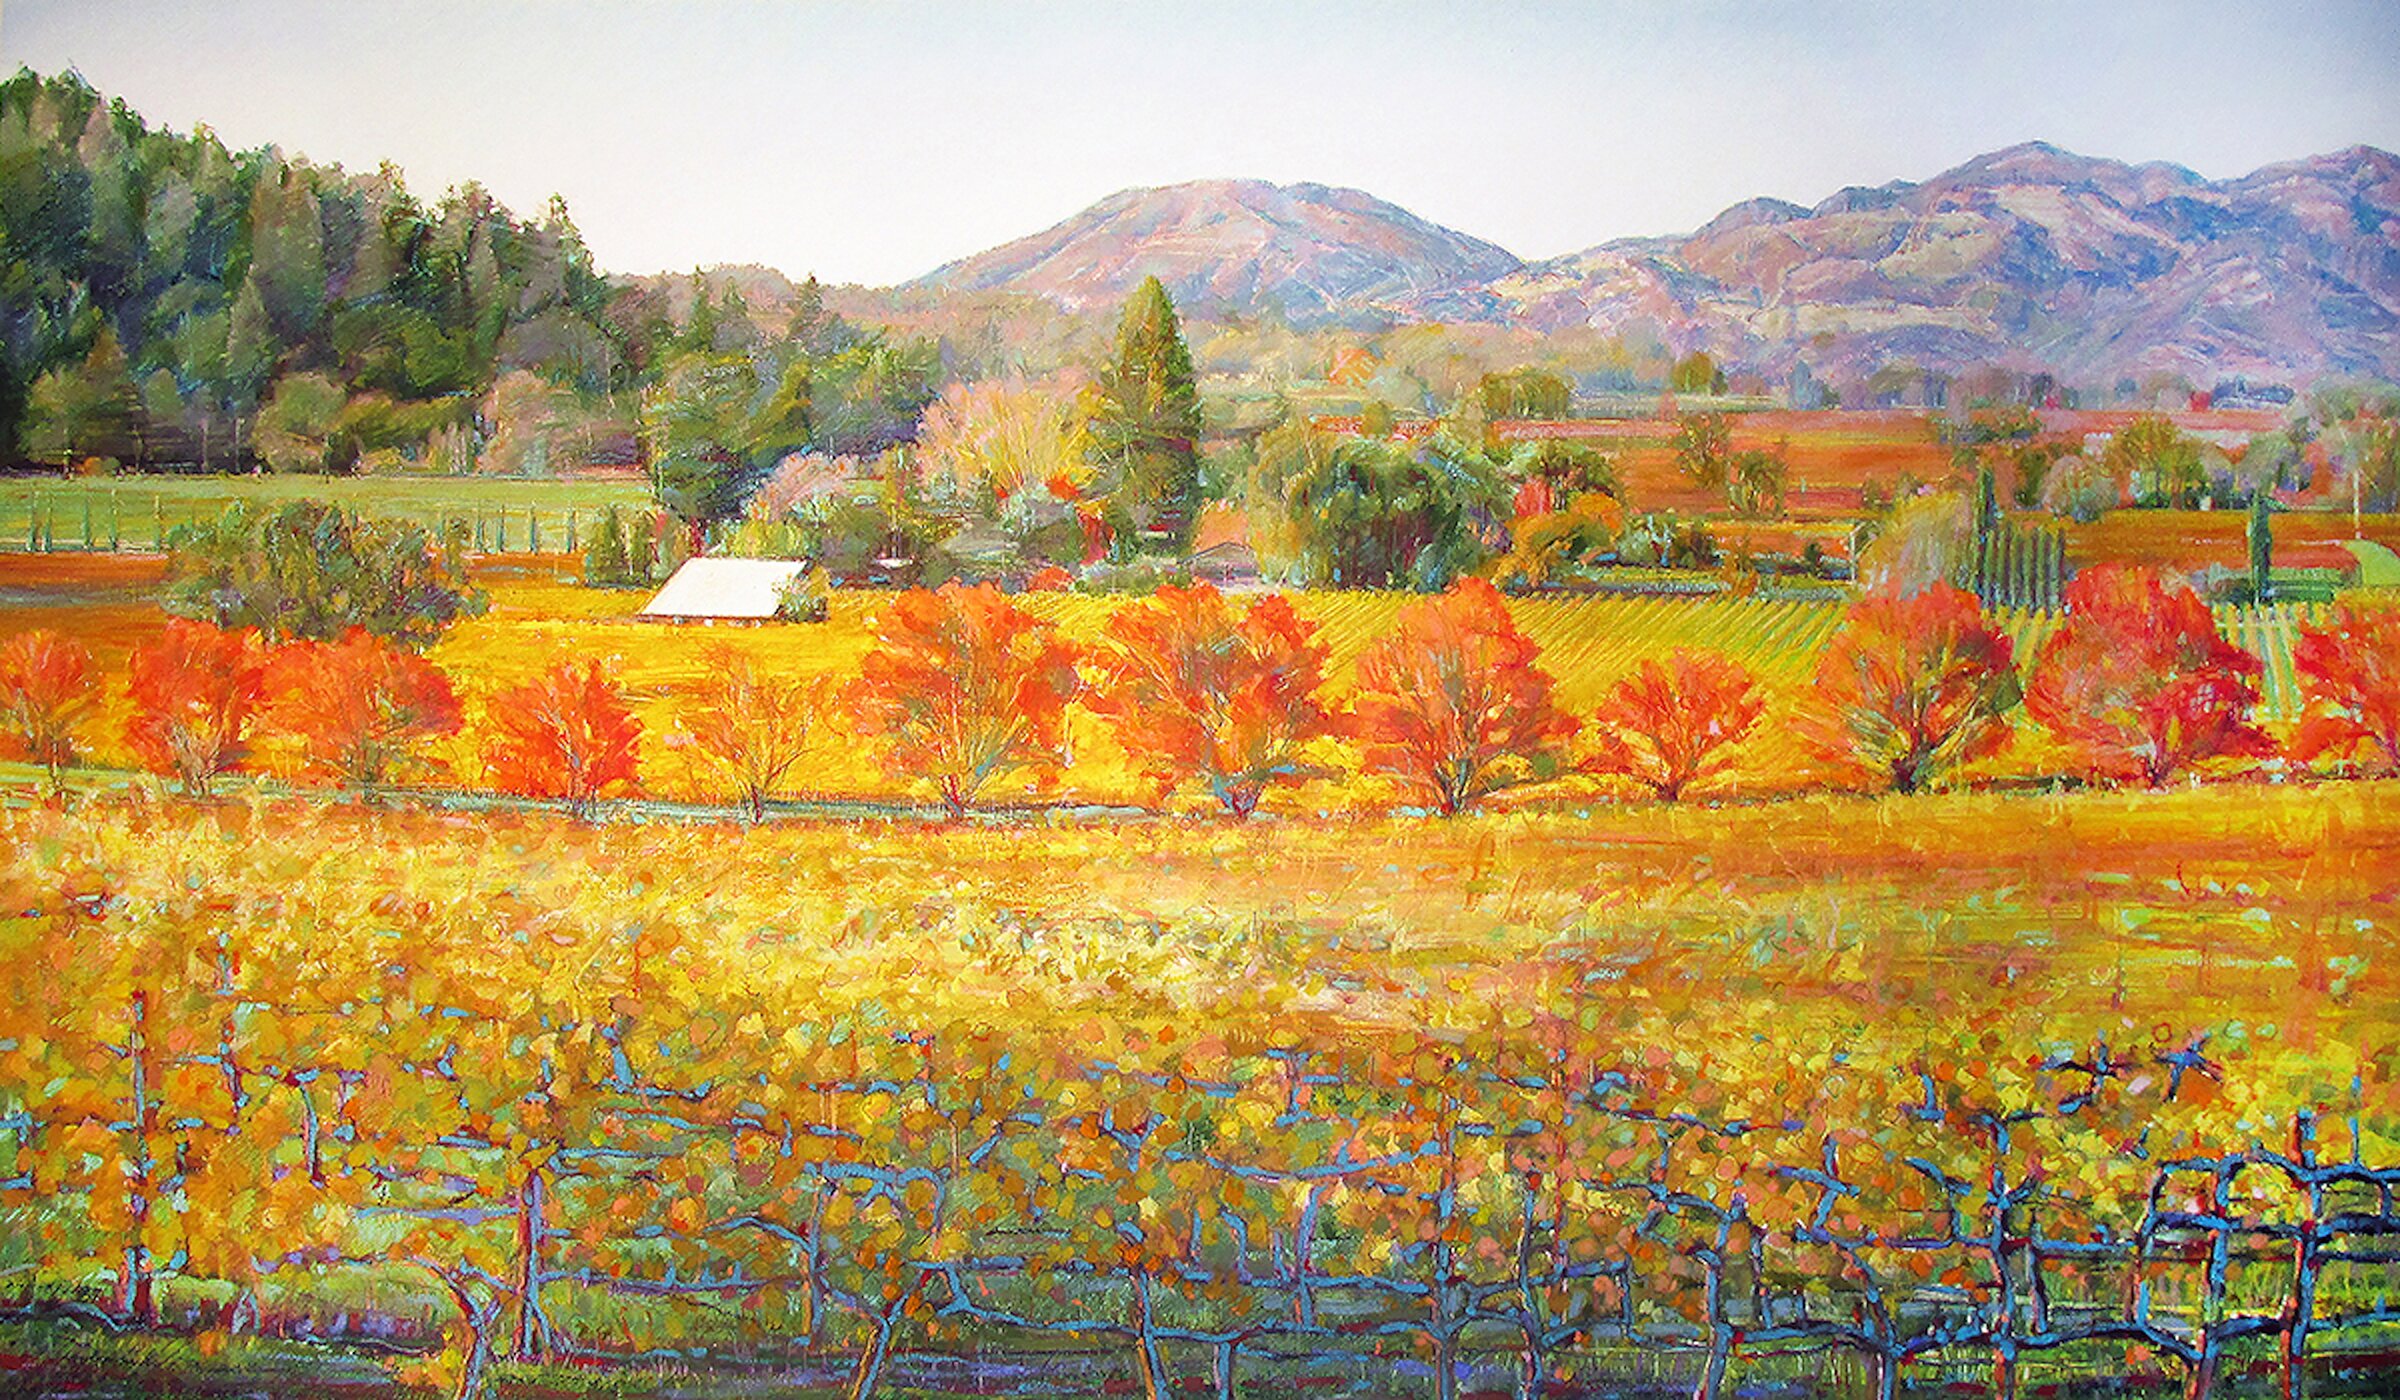 Steven Gordon: 'UpValley', 2022 , Landscape. MyUpValleybrings the beauty of Napa Valley during our Harvest on a full Fall day.  The vineyards and the trees along the roads are changing color and the largest iconic mountain in The Valley, Mount St.  Helena is seen towering in the distance.  The original oil painting was created for a ...